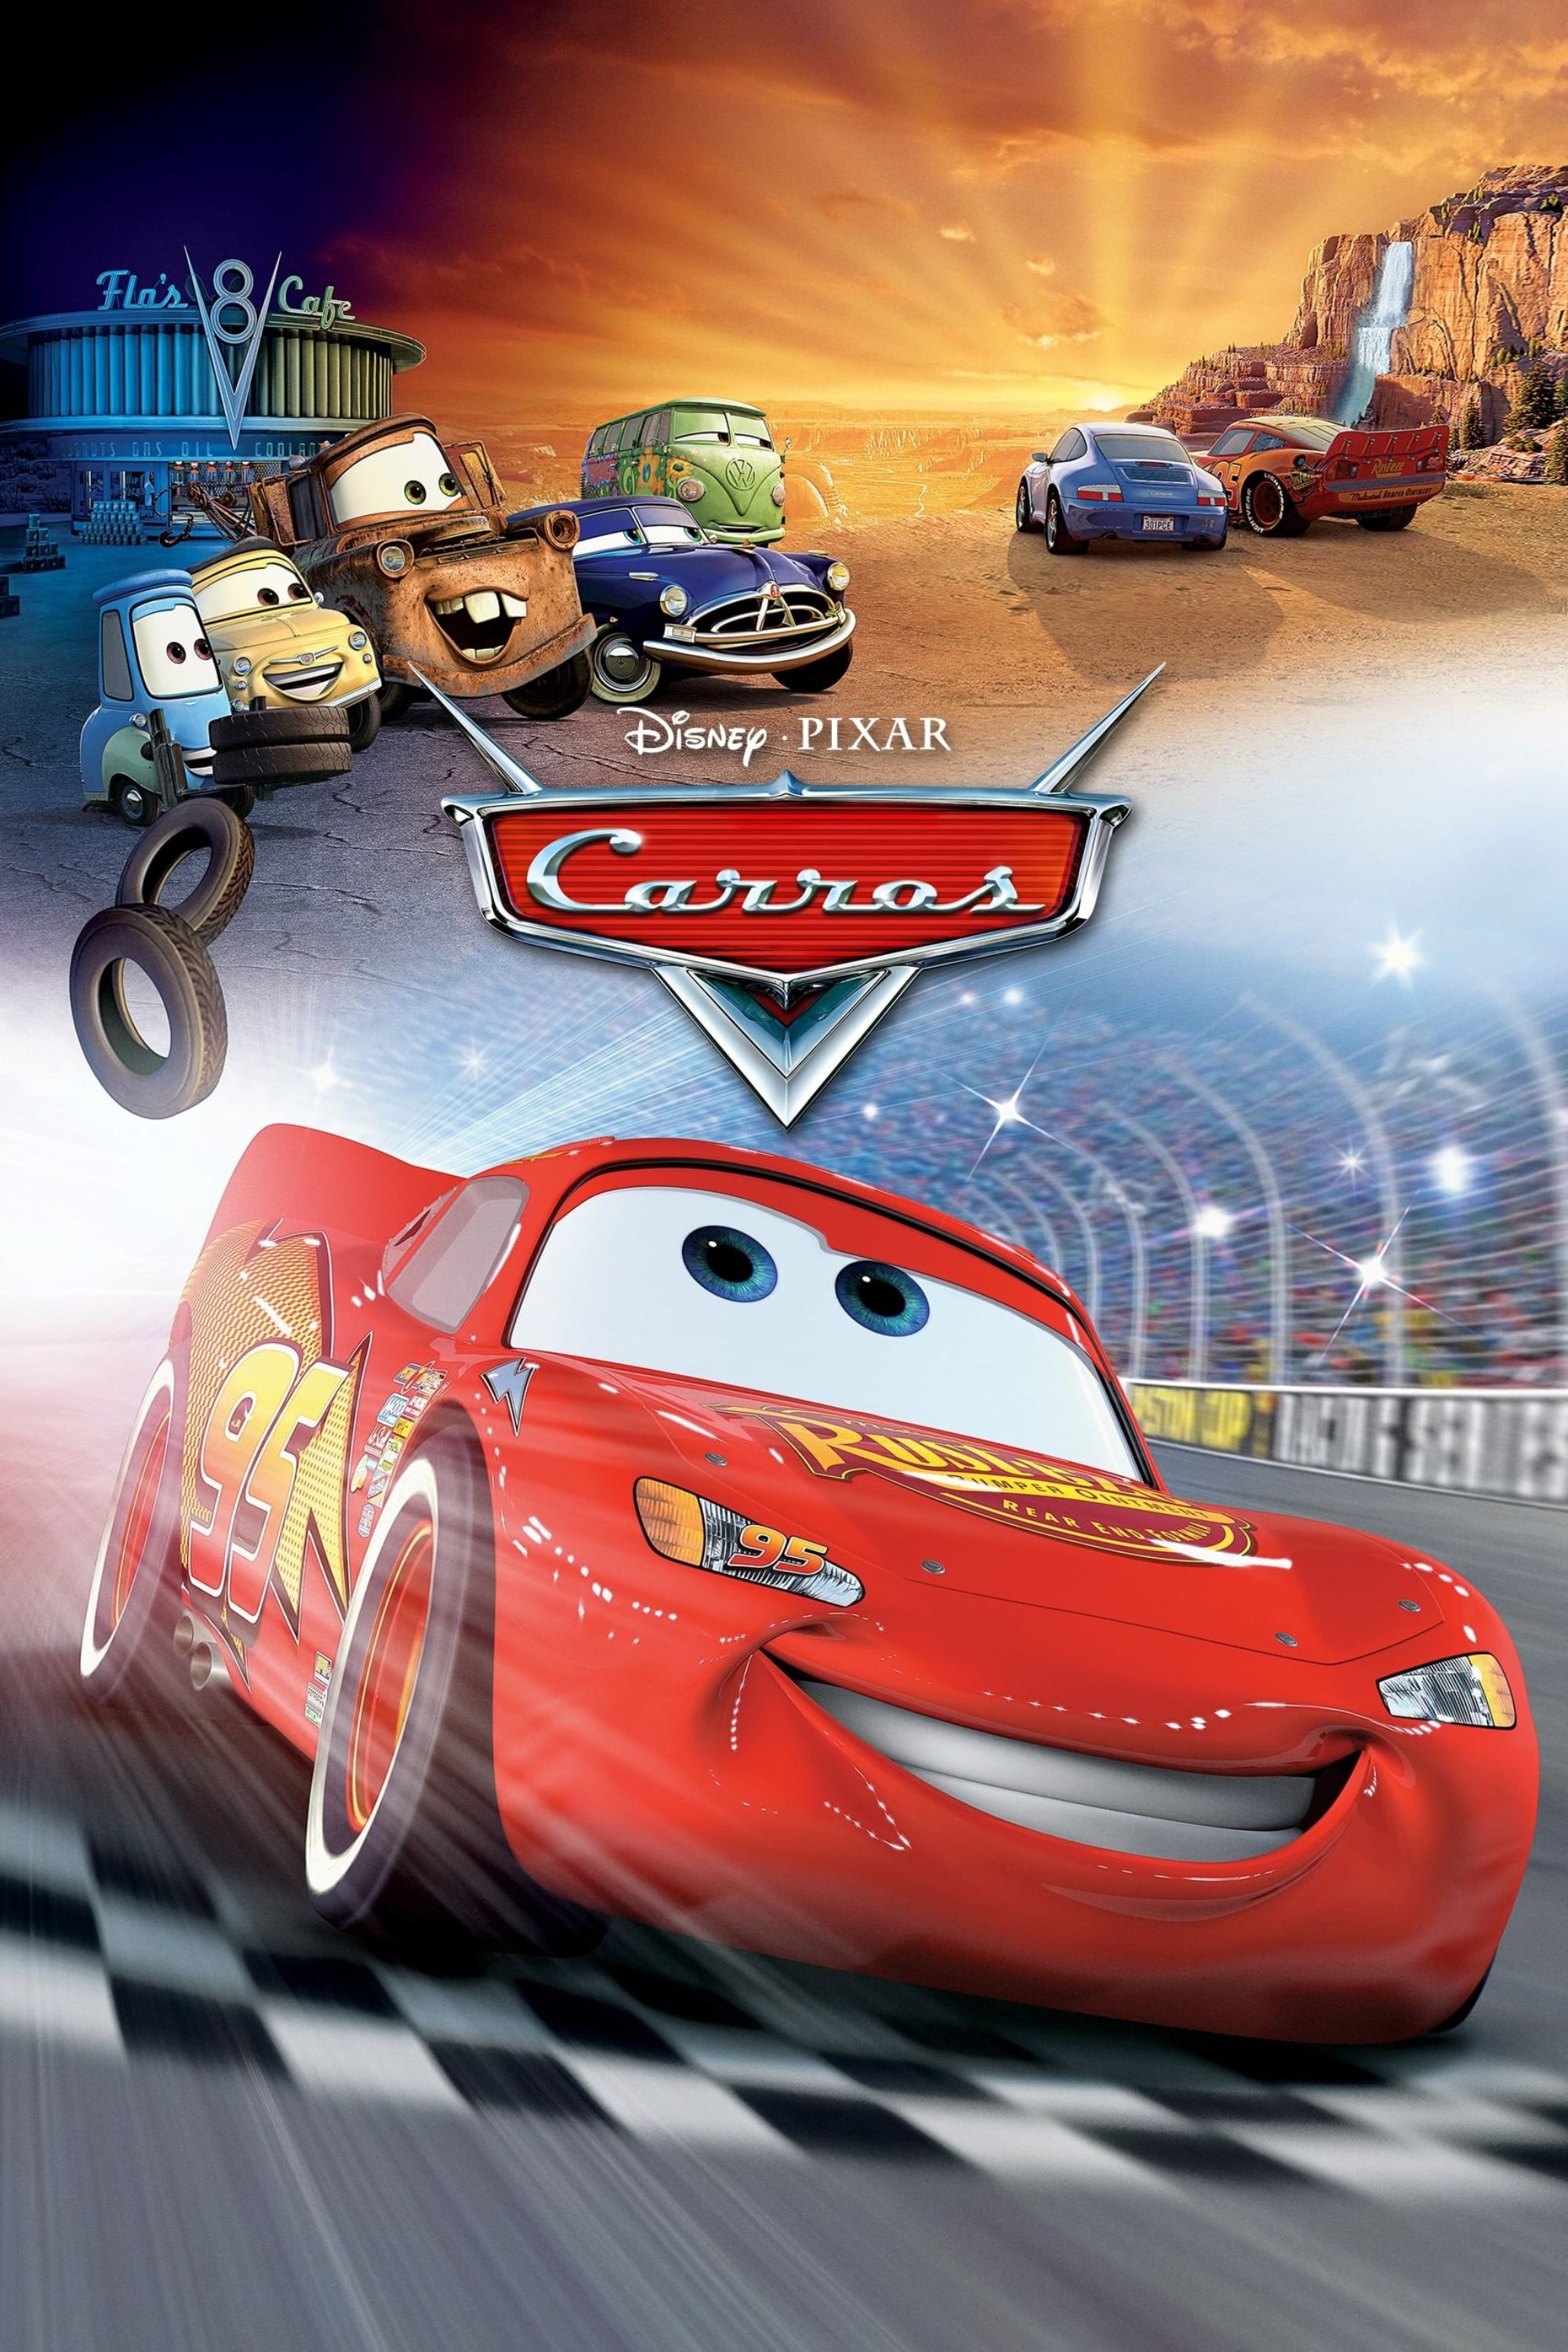 Carros, The Dubbing Database